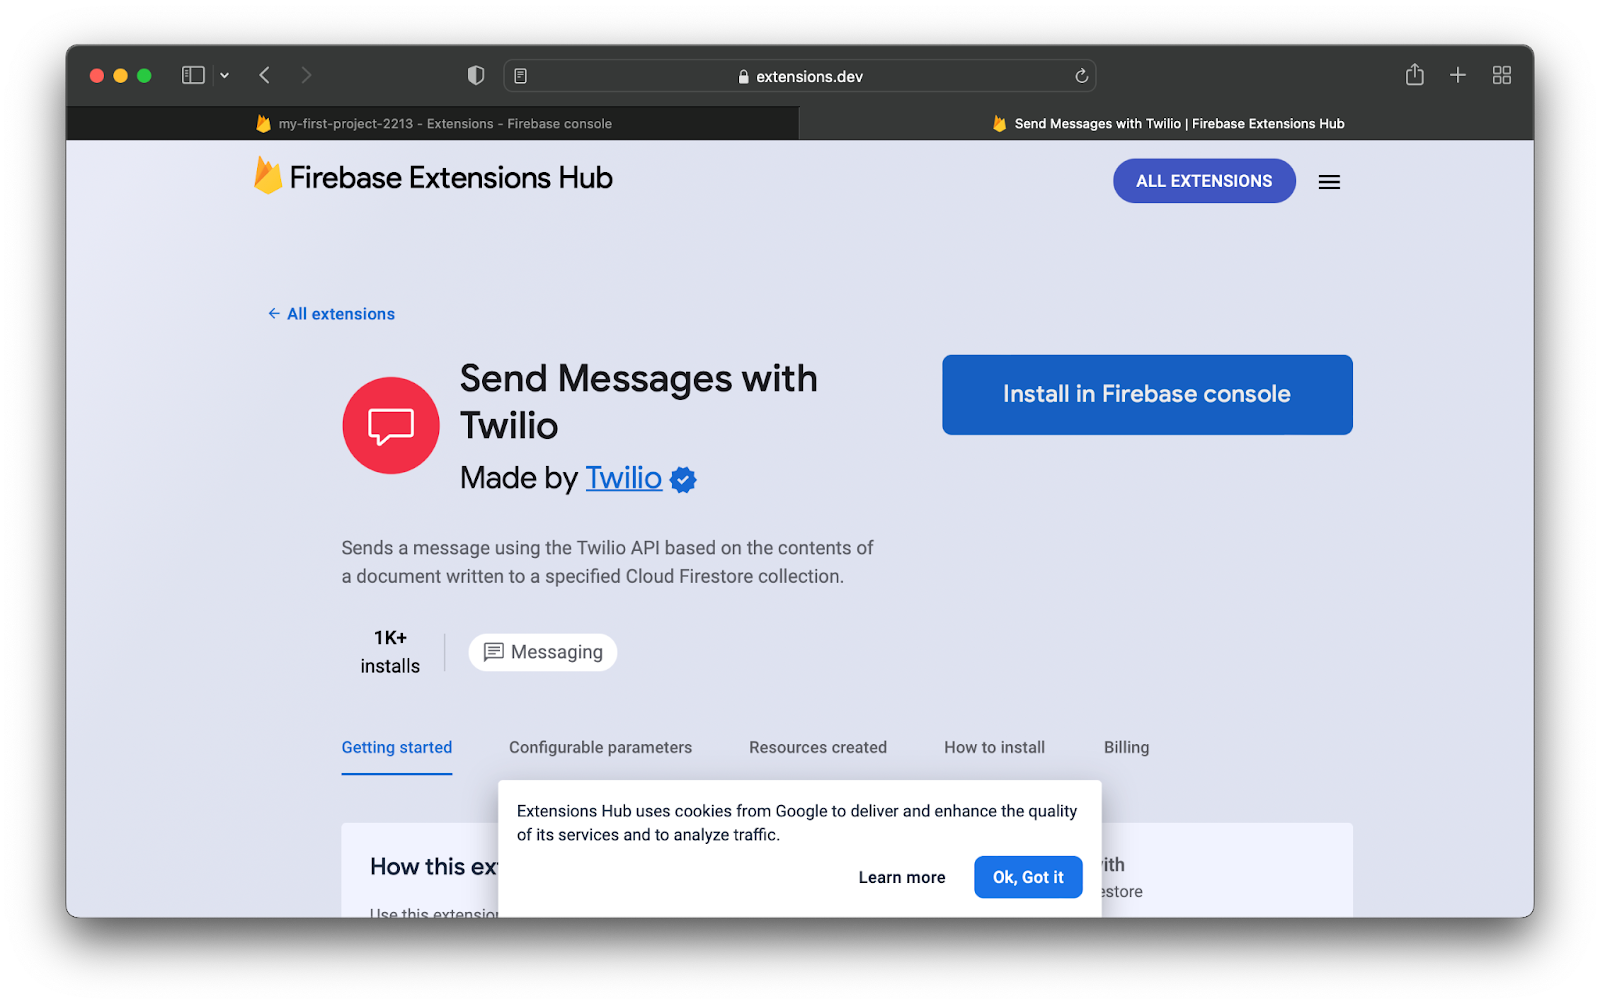 Send Messages with Twilio extension page on Firebase Extensions Marketplace